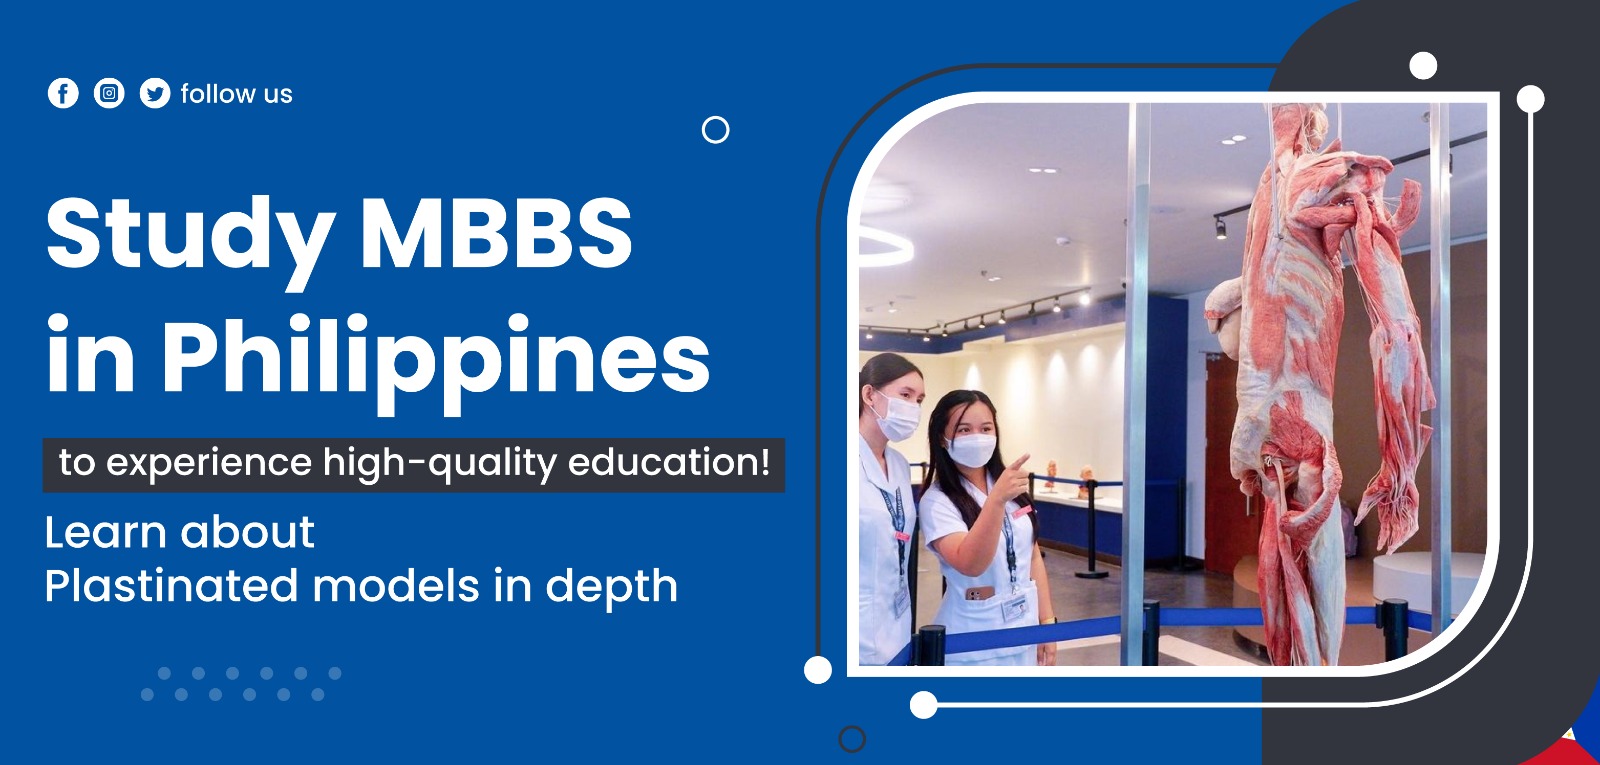 Learn about Plastinated models in depthStudy MBBS in Philippines to experience high-quality education!